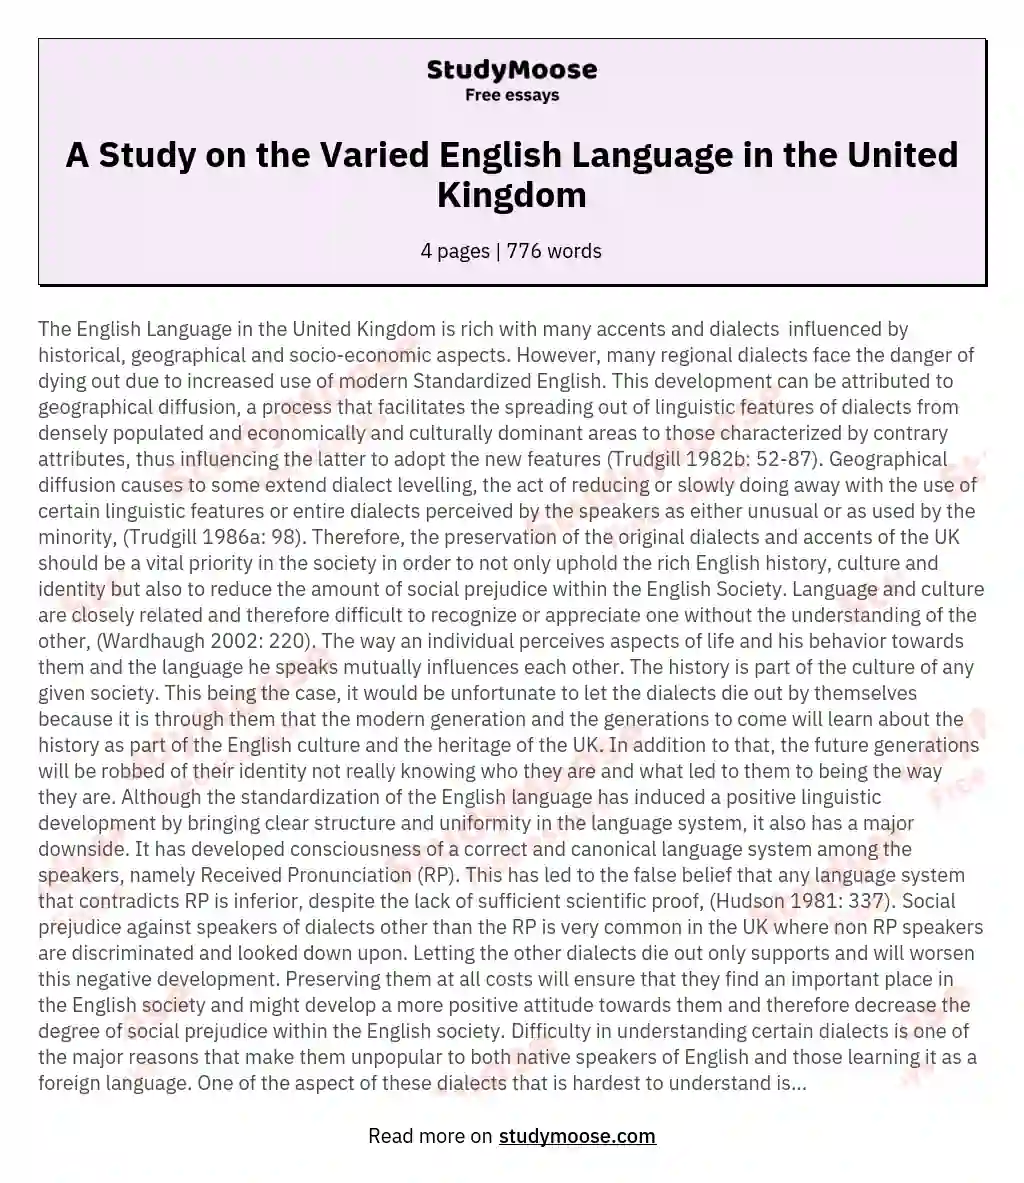 A Study on the Varied English Language in the United Kingdom essay